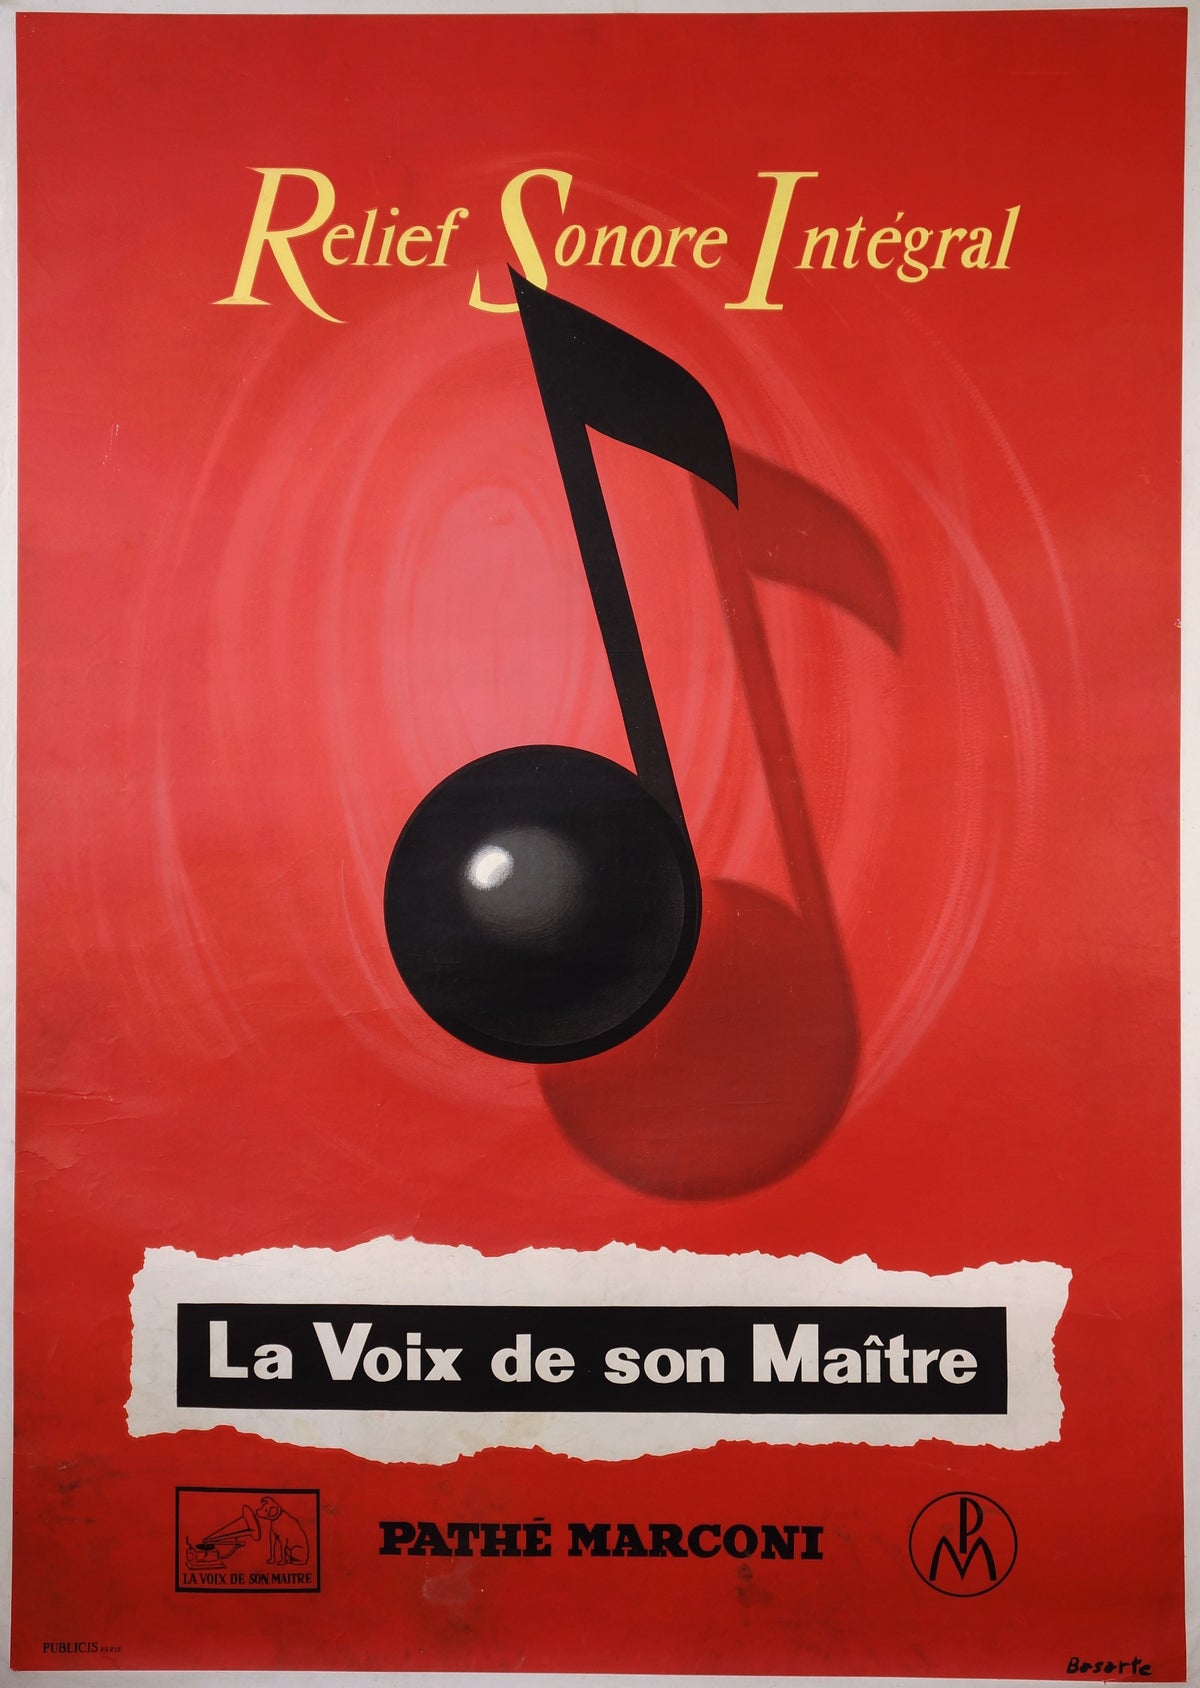 Relief Sonore Integral - Authentic Vintage Poster